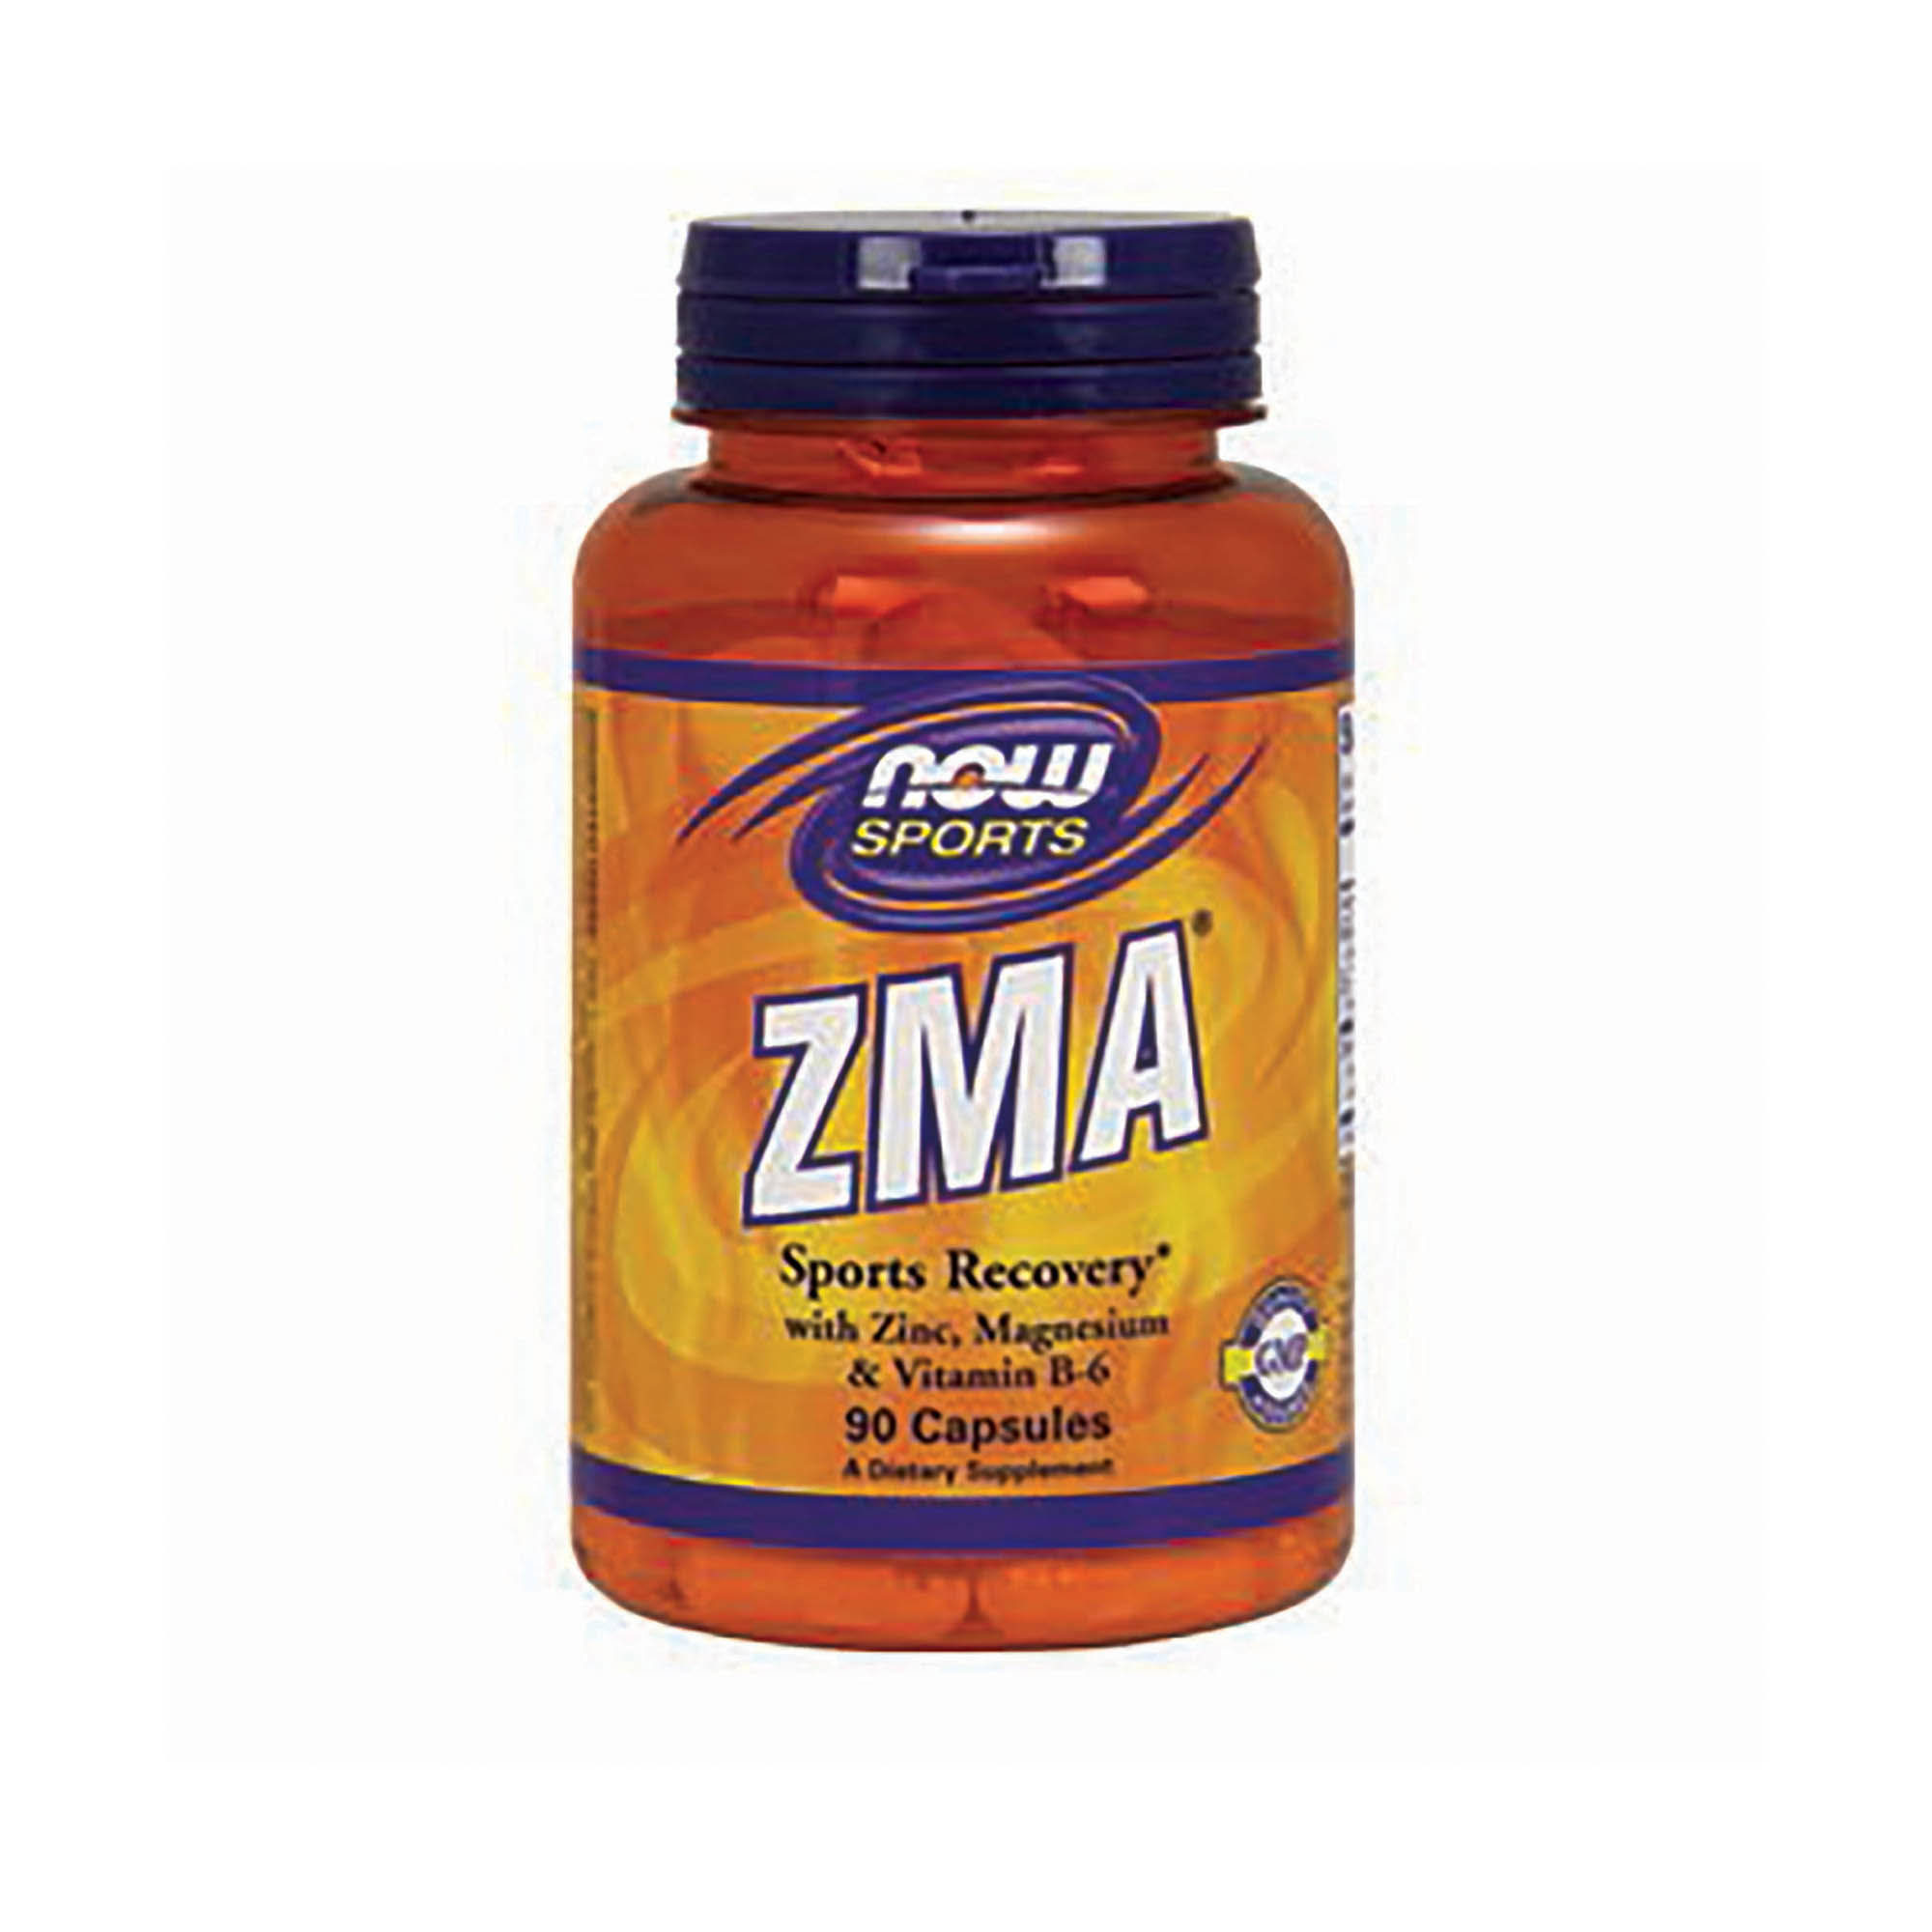 Now Foods ZMA Sports Recovery Dietary Supplement - 90 Capsules